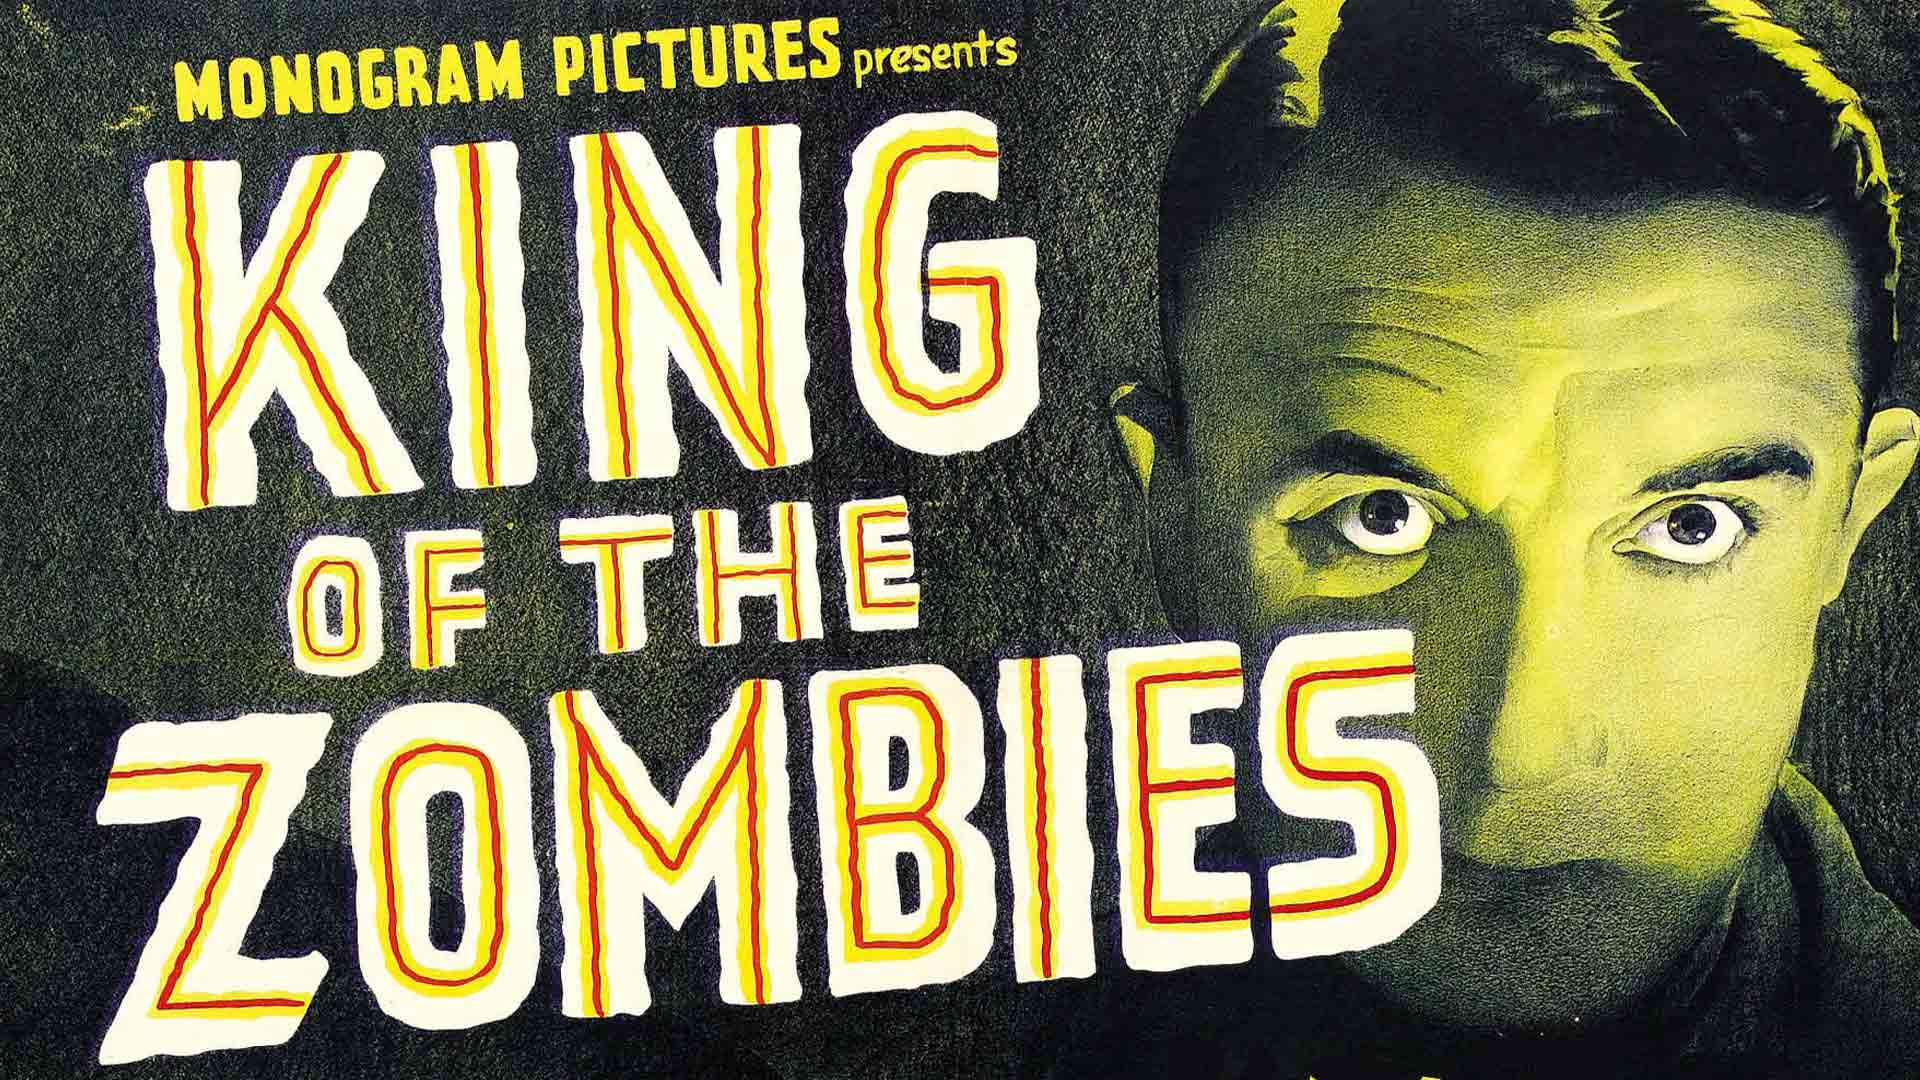 King of the Zombies